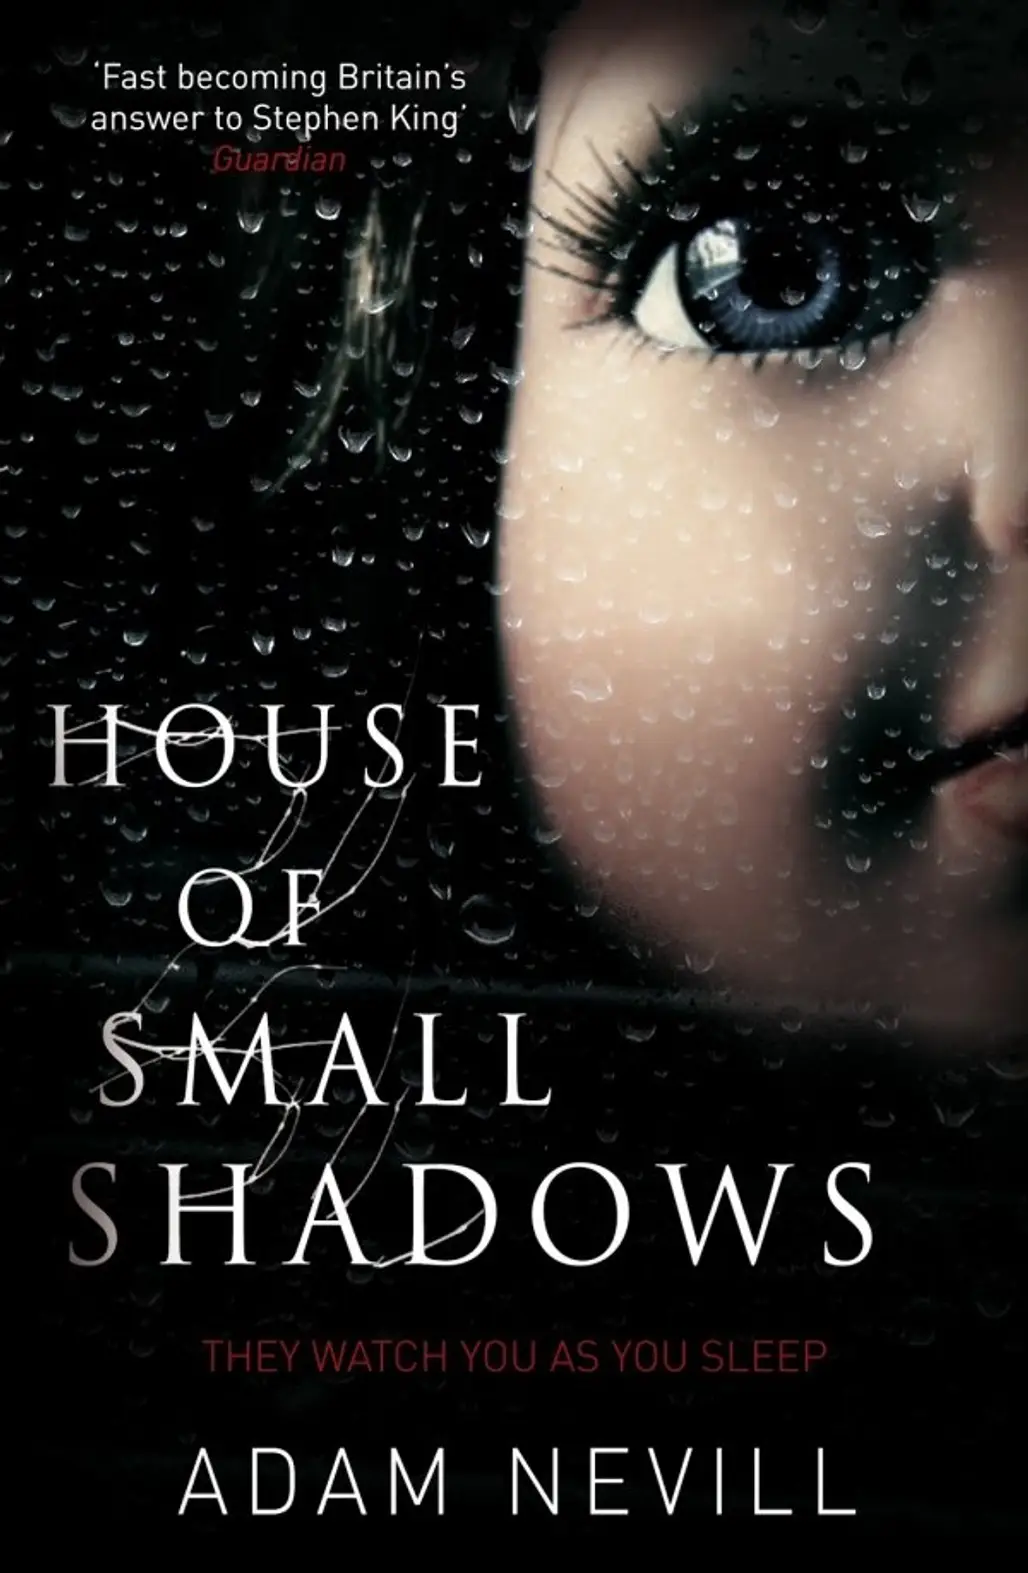 House of Small Shadows by Adam Nevill